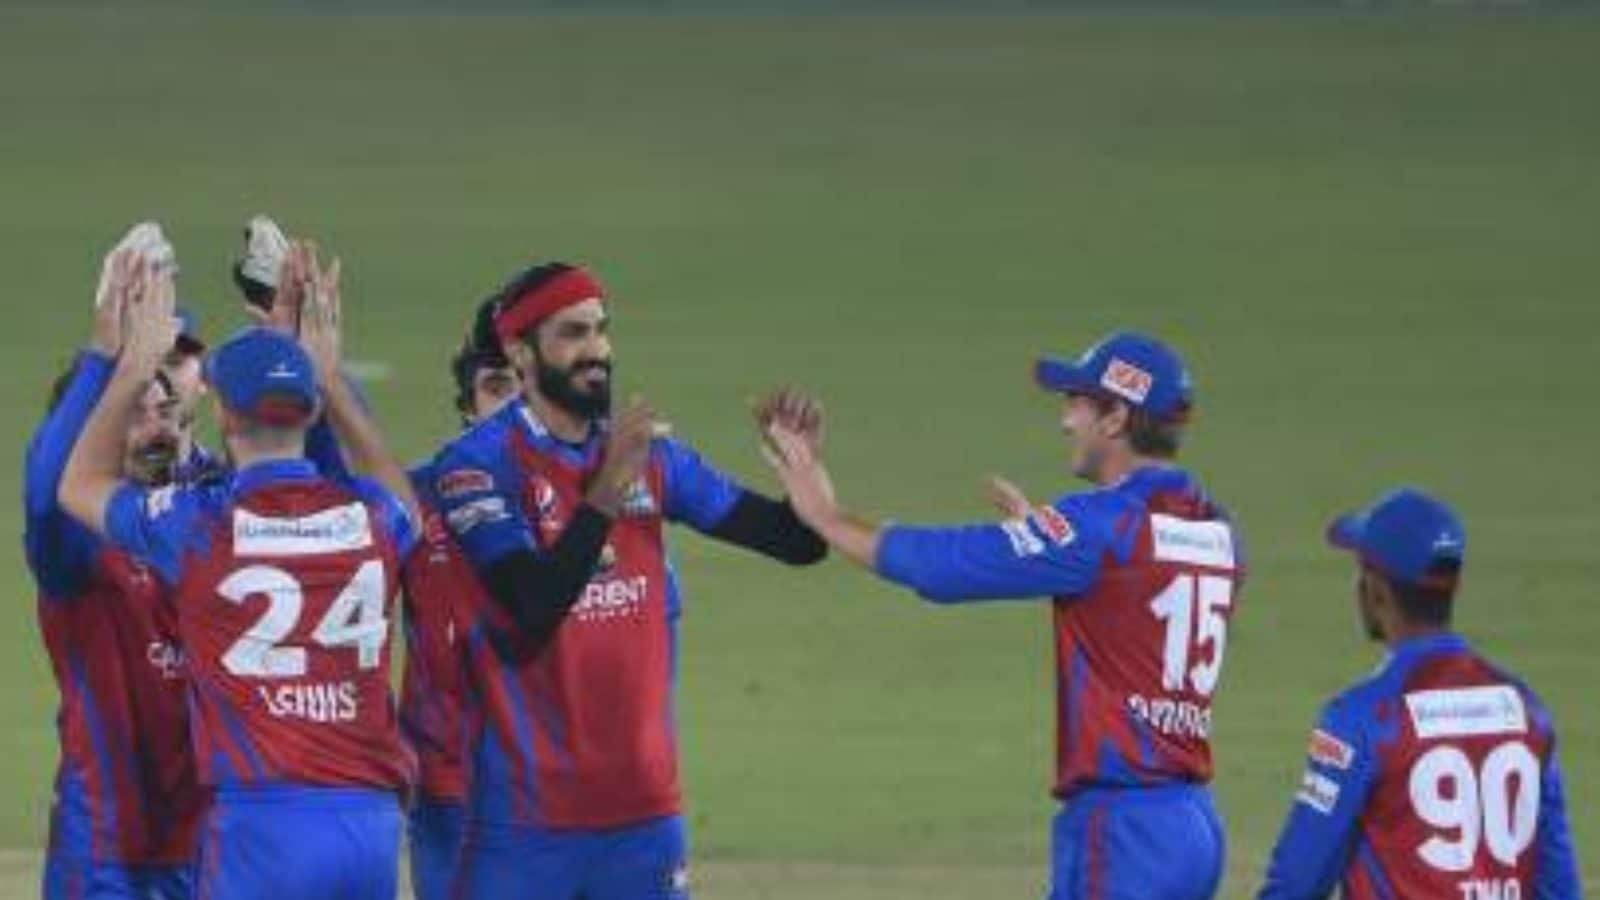 Pakistan Super League 2022 Live Streaming, Karachi Kings vs Peshawar Zalmi When And Where to Watch PSL 2022 Match on TV And Online